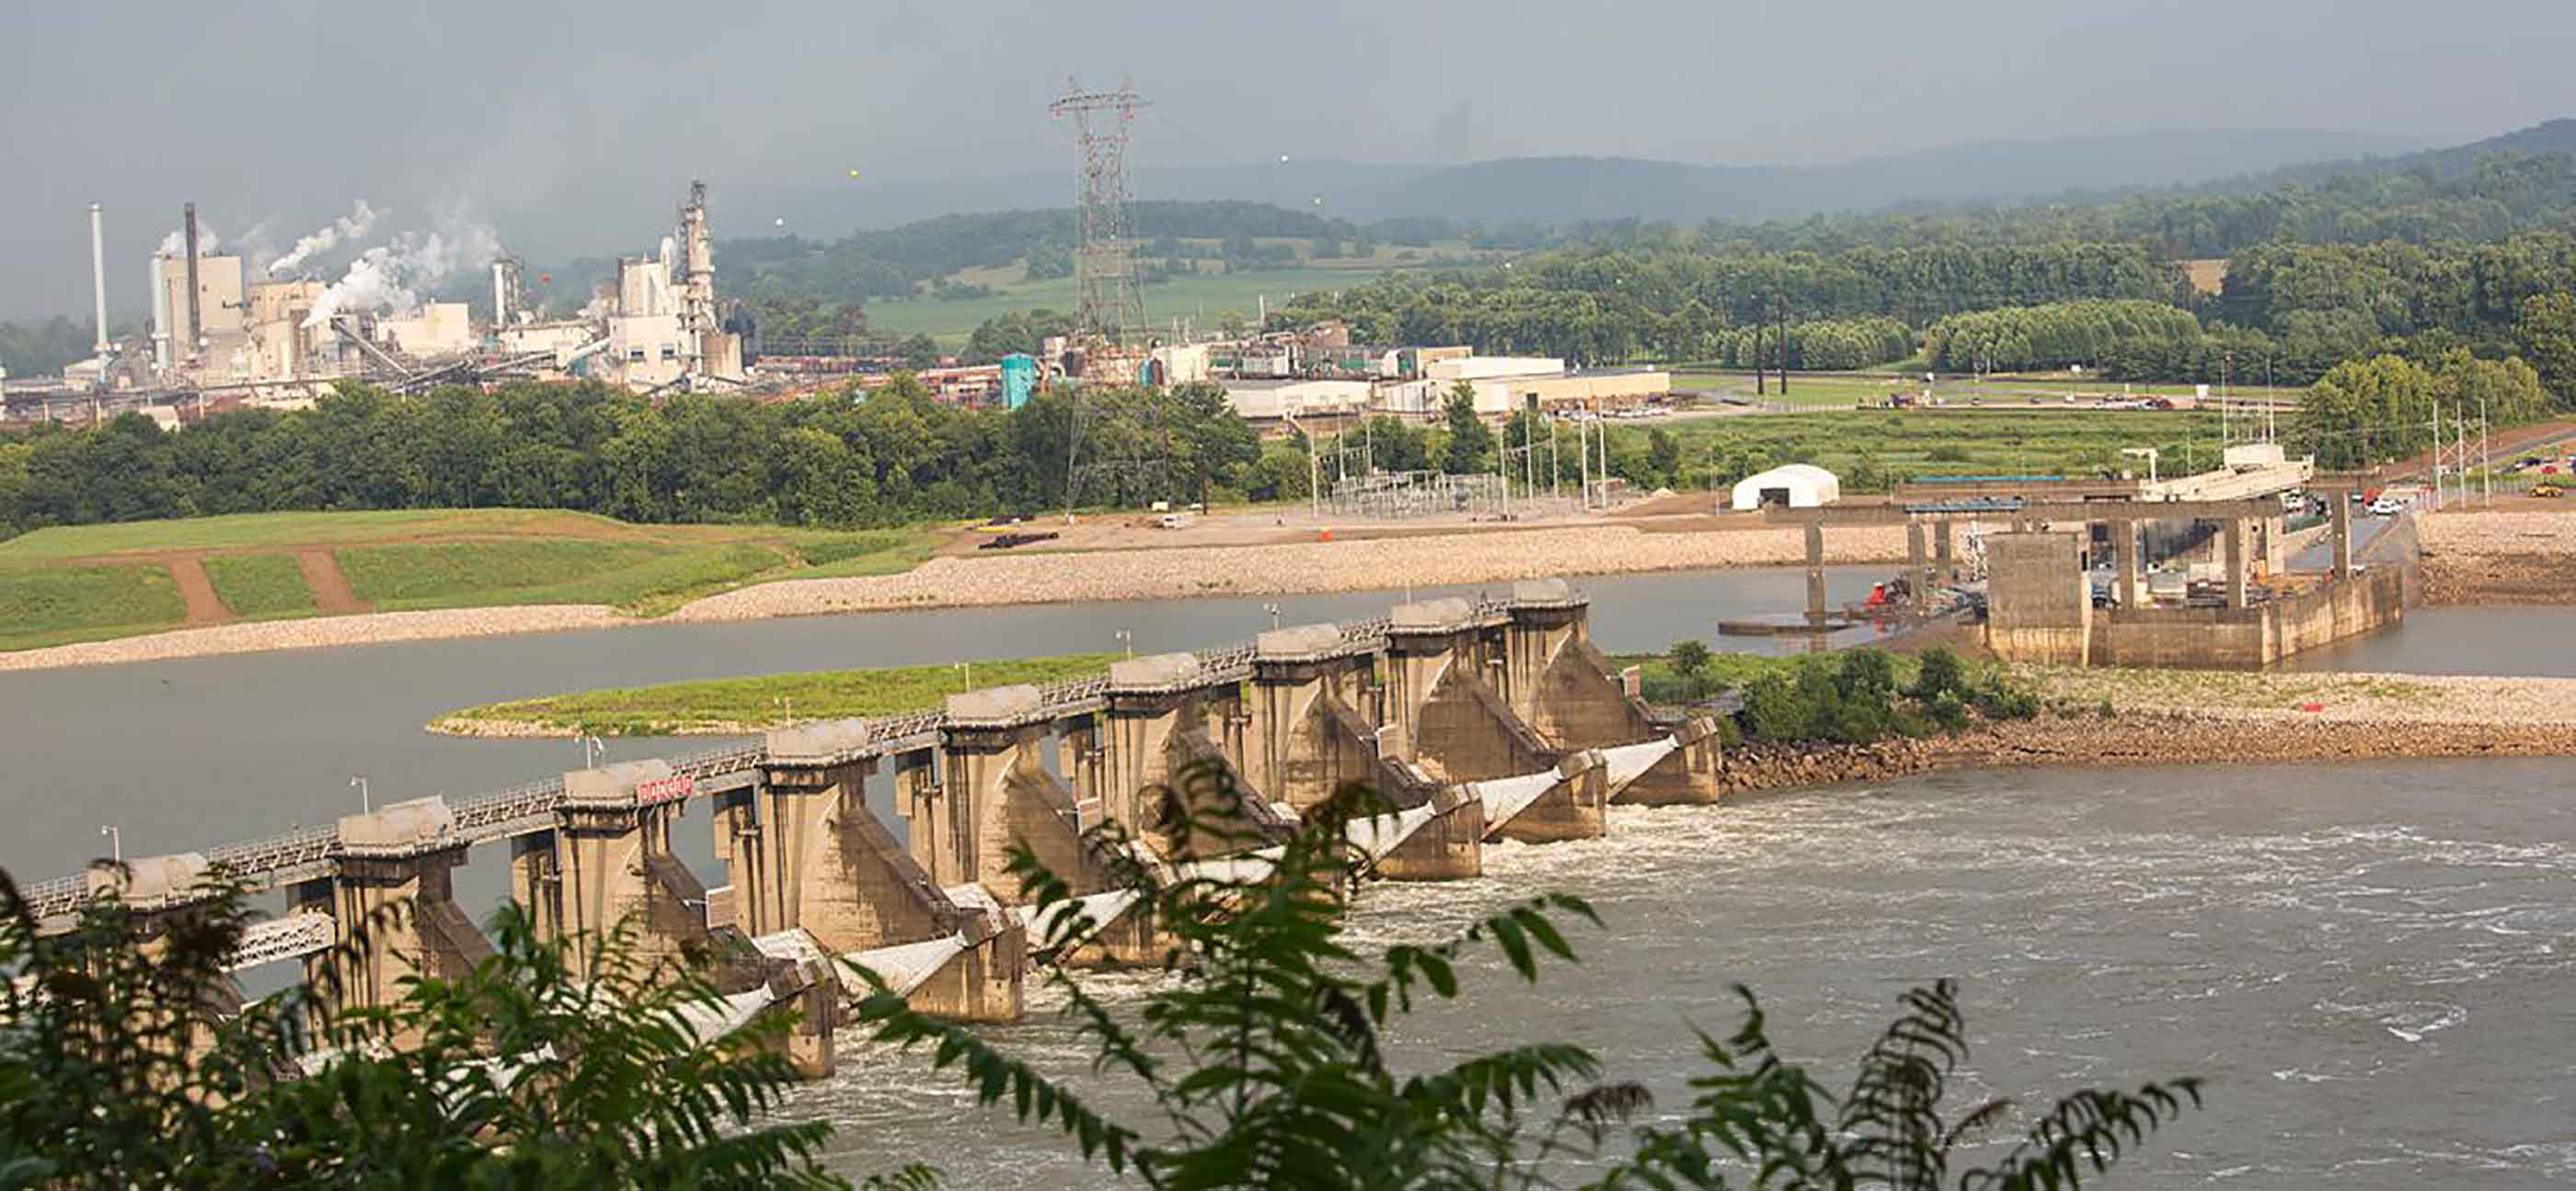 Infrastructure investments pay off long term; hydropower is great place to start